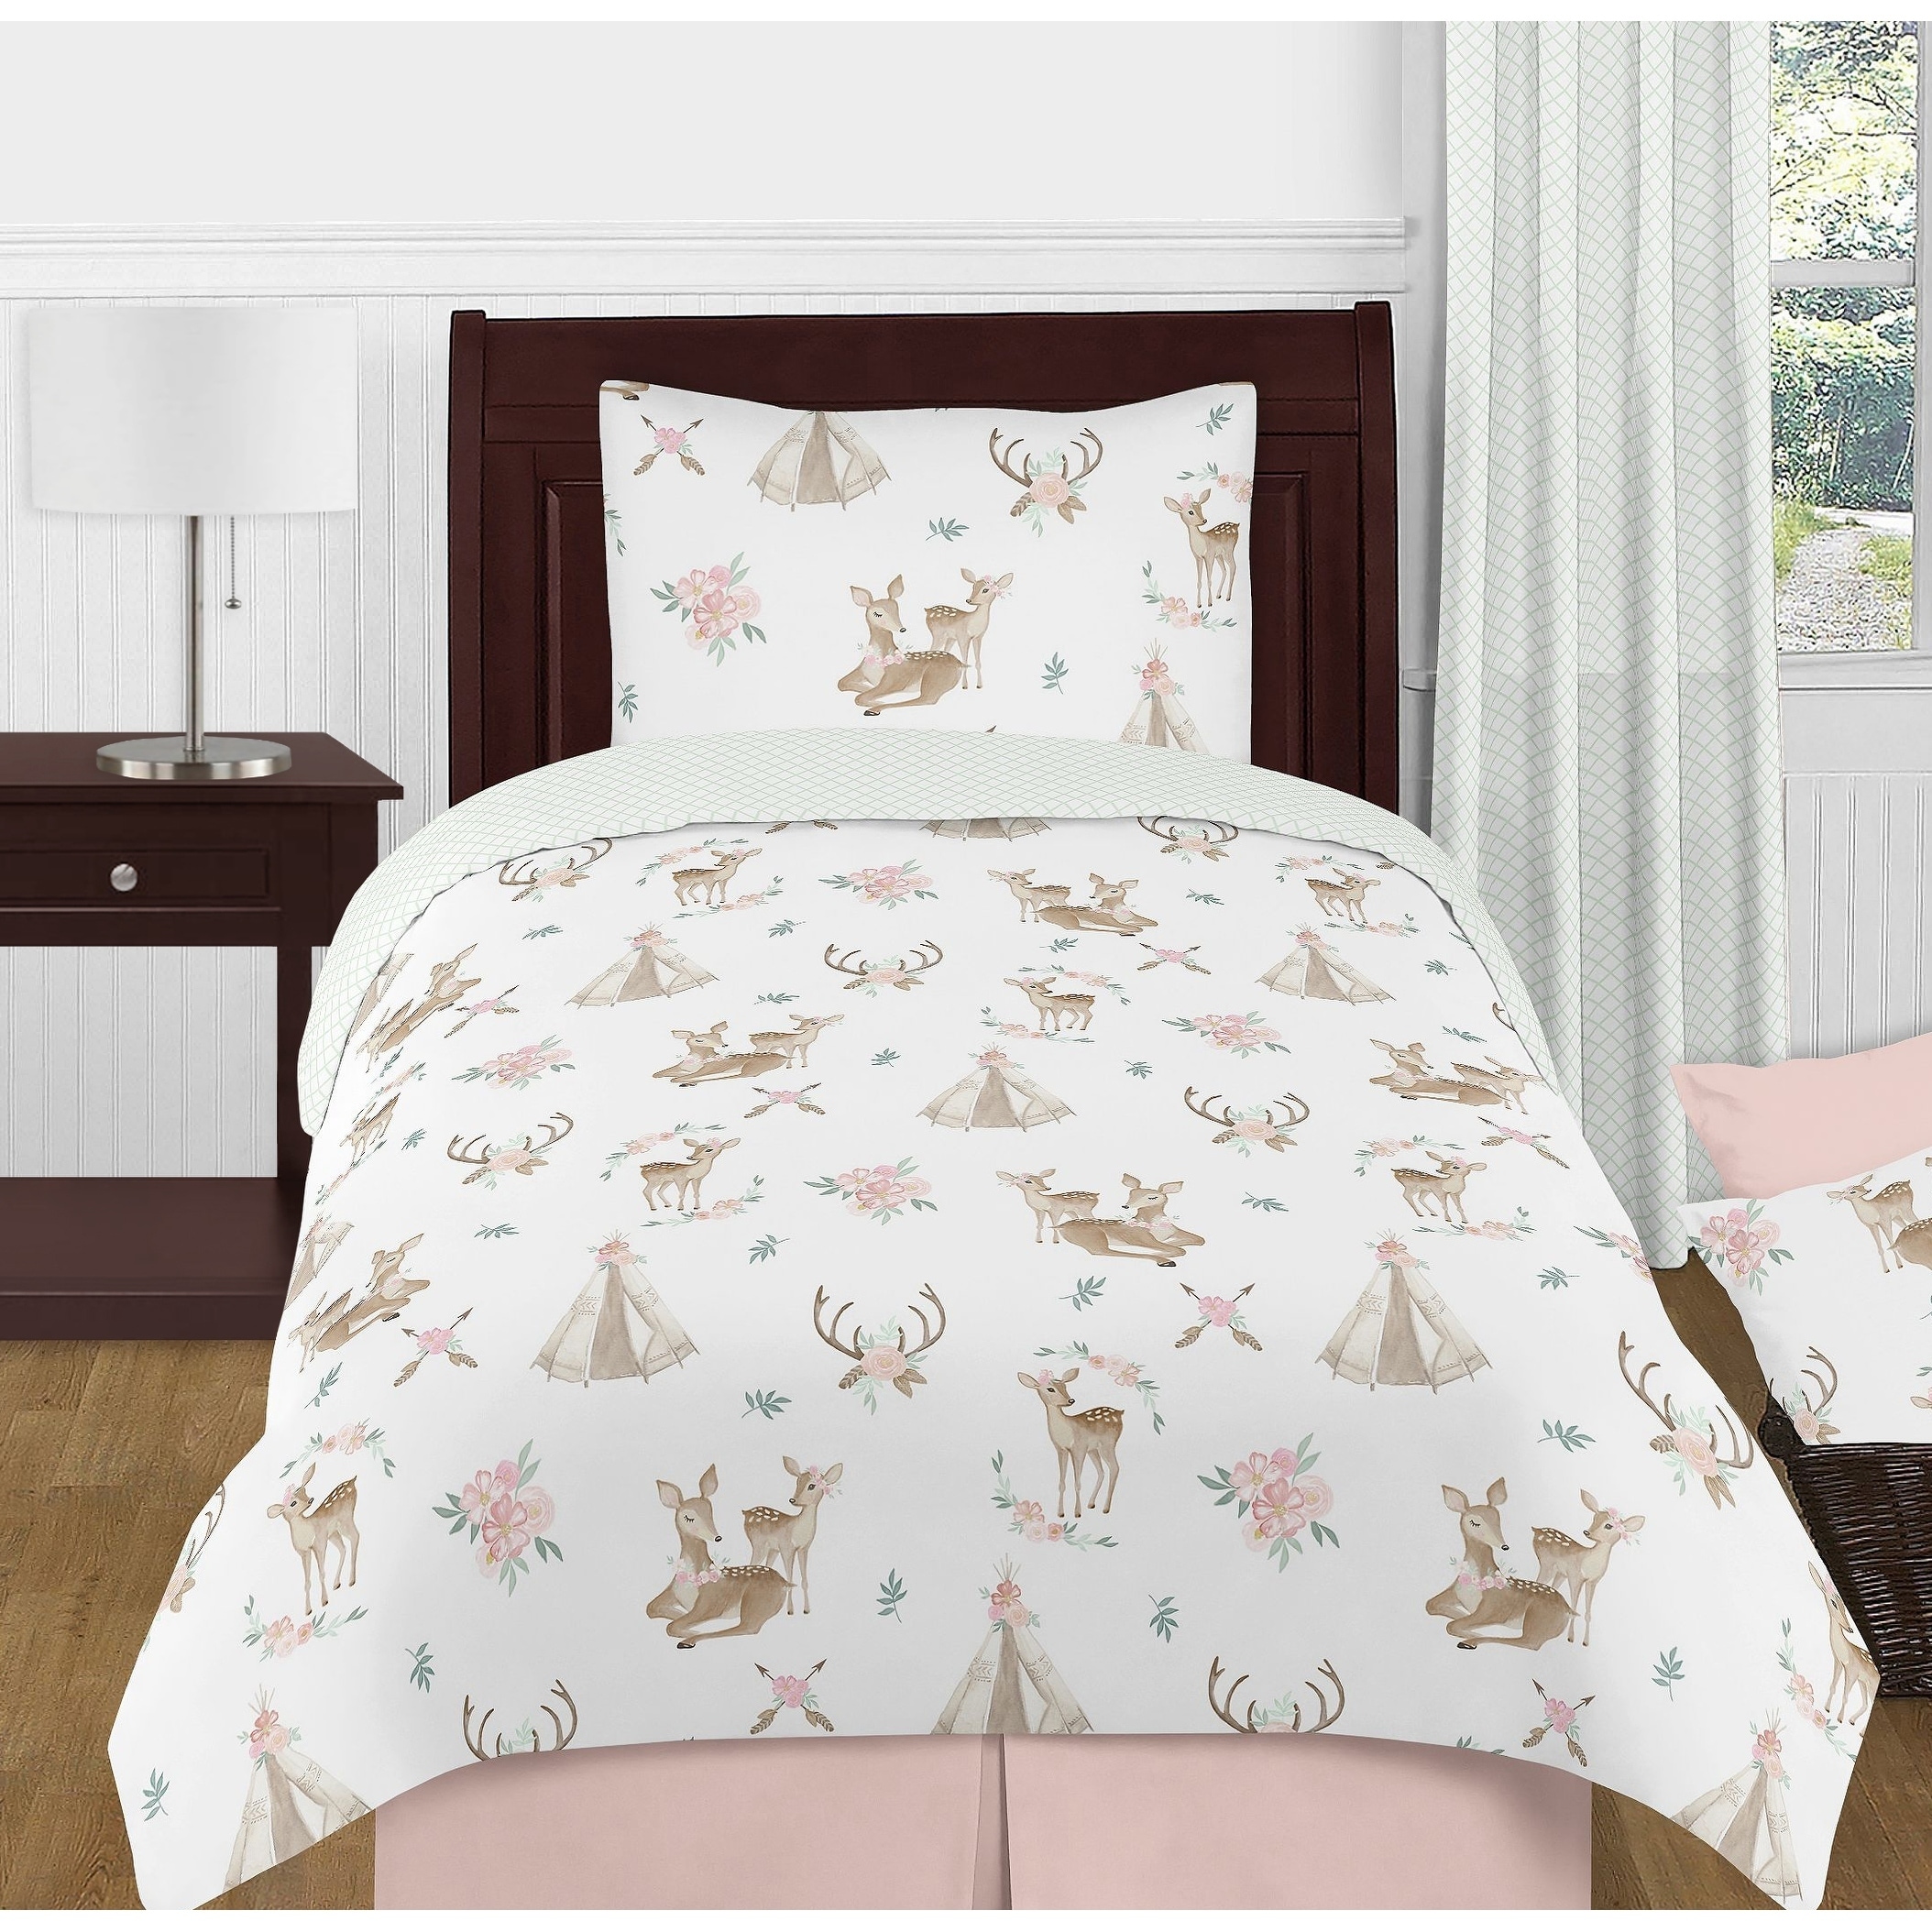 twin girls bed set